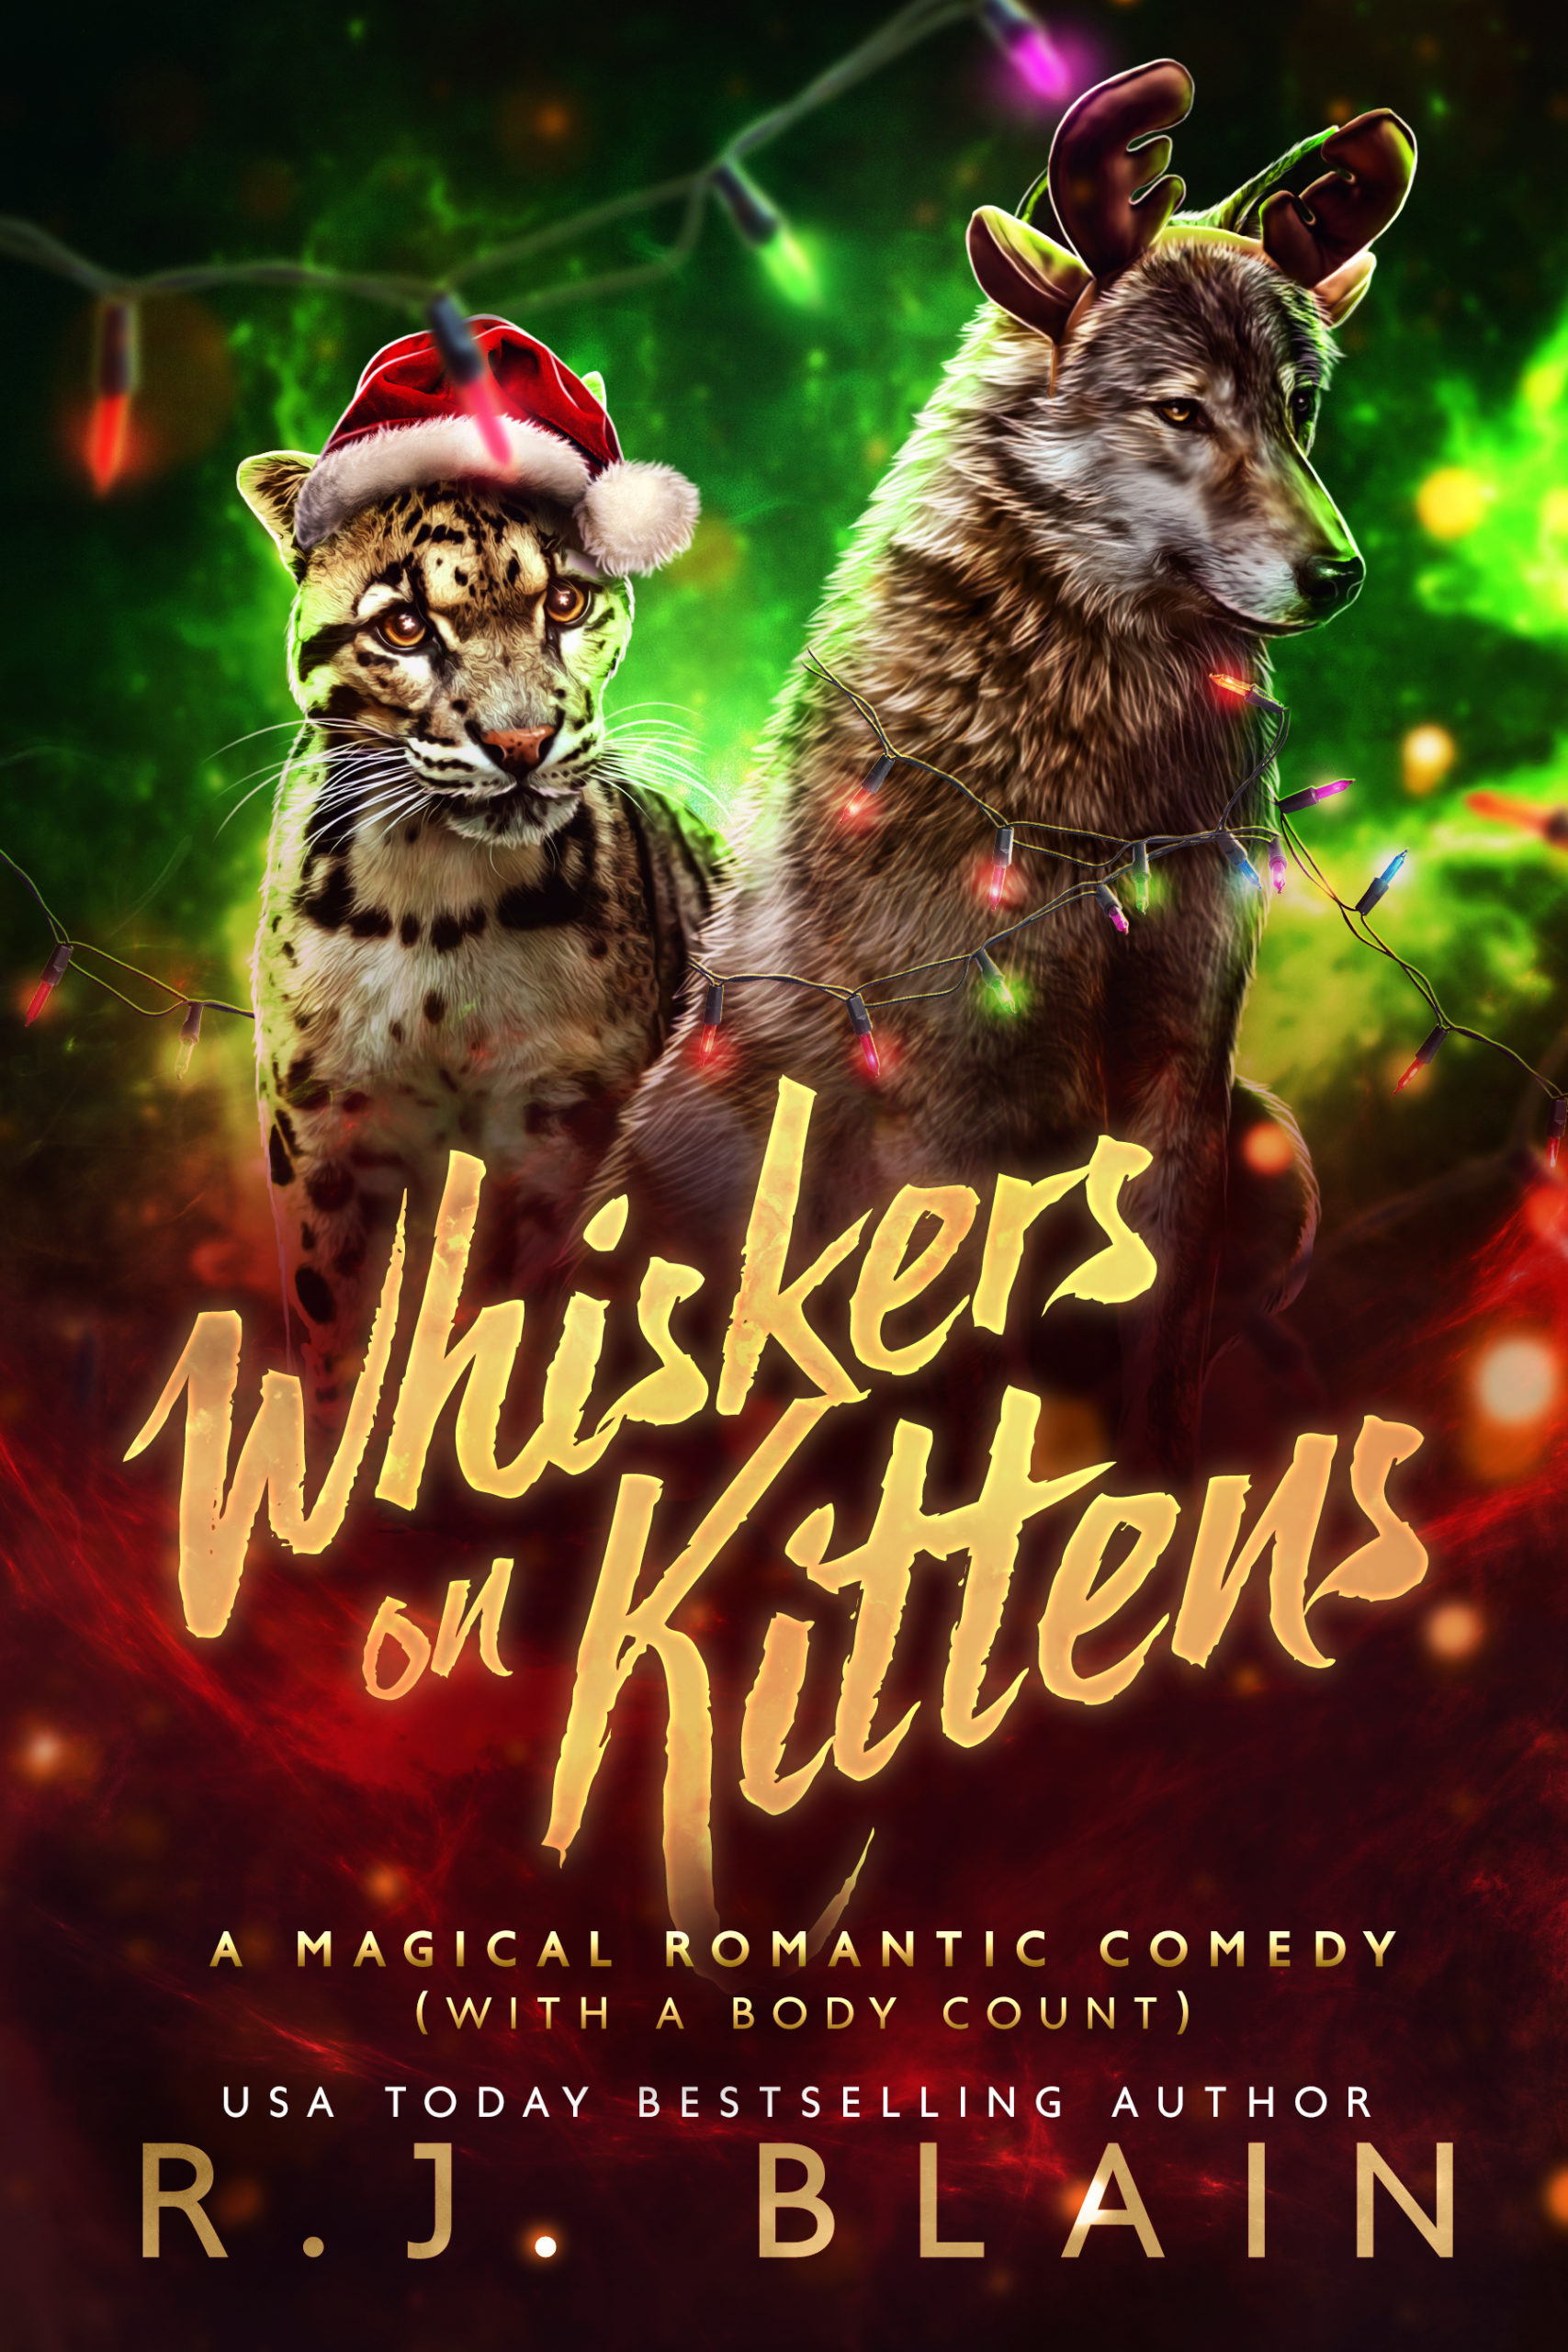 Whiskers on Kittens has released!